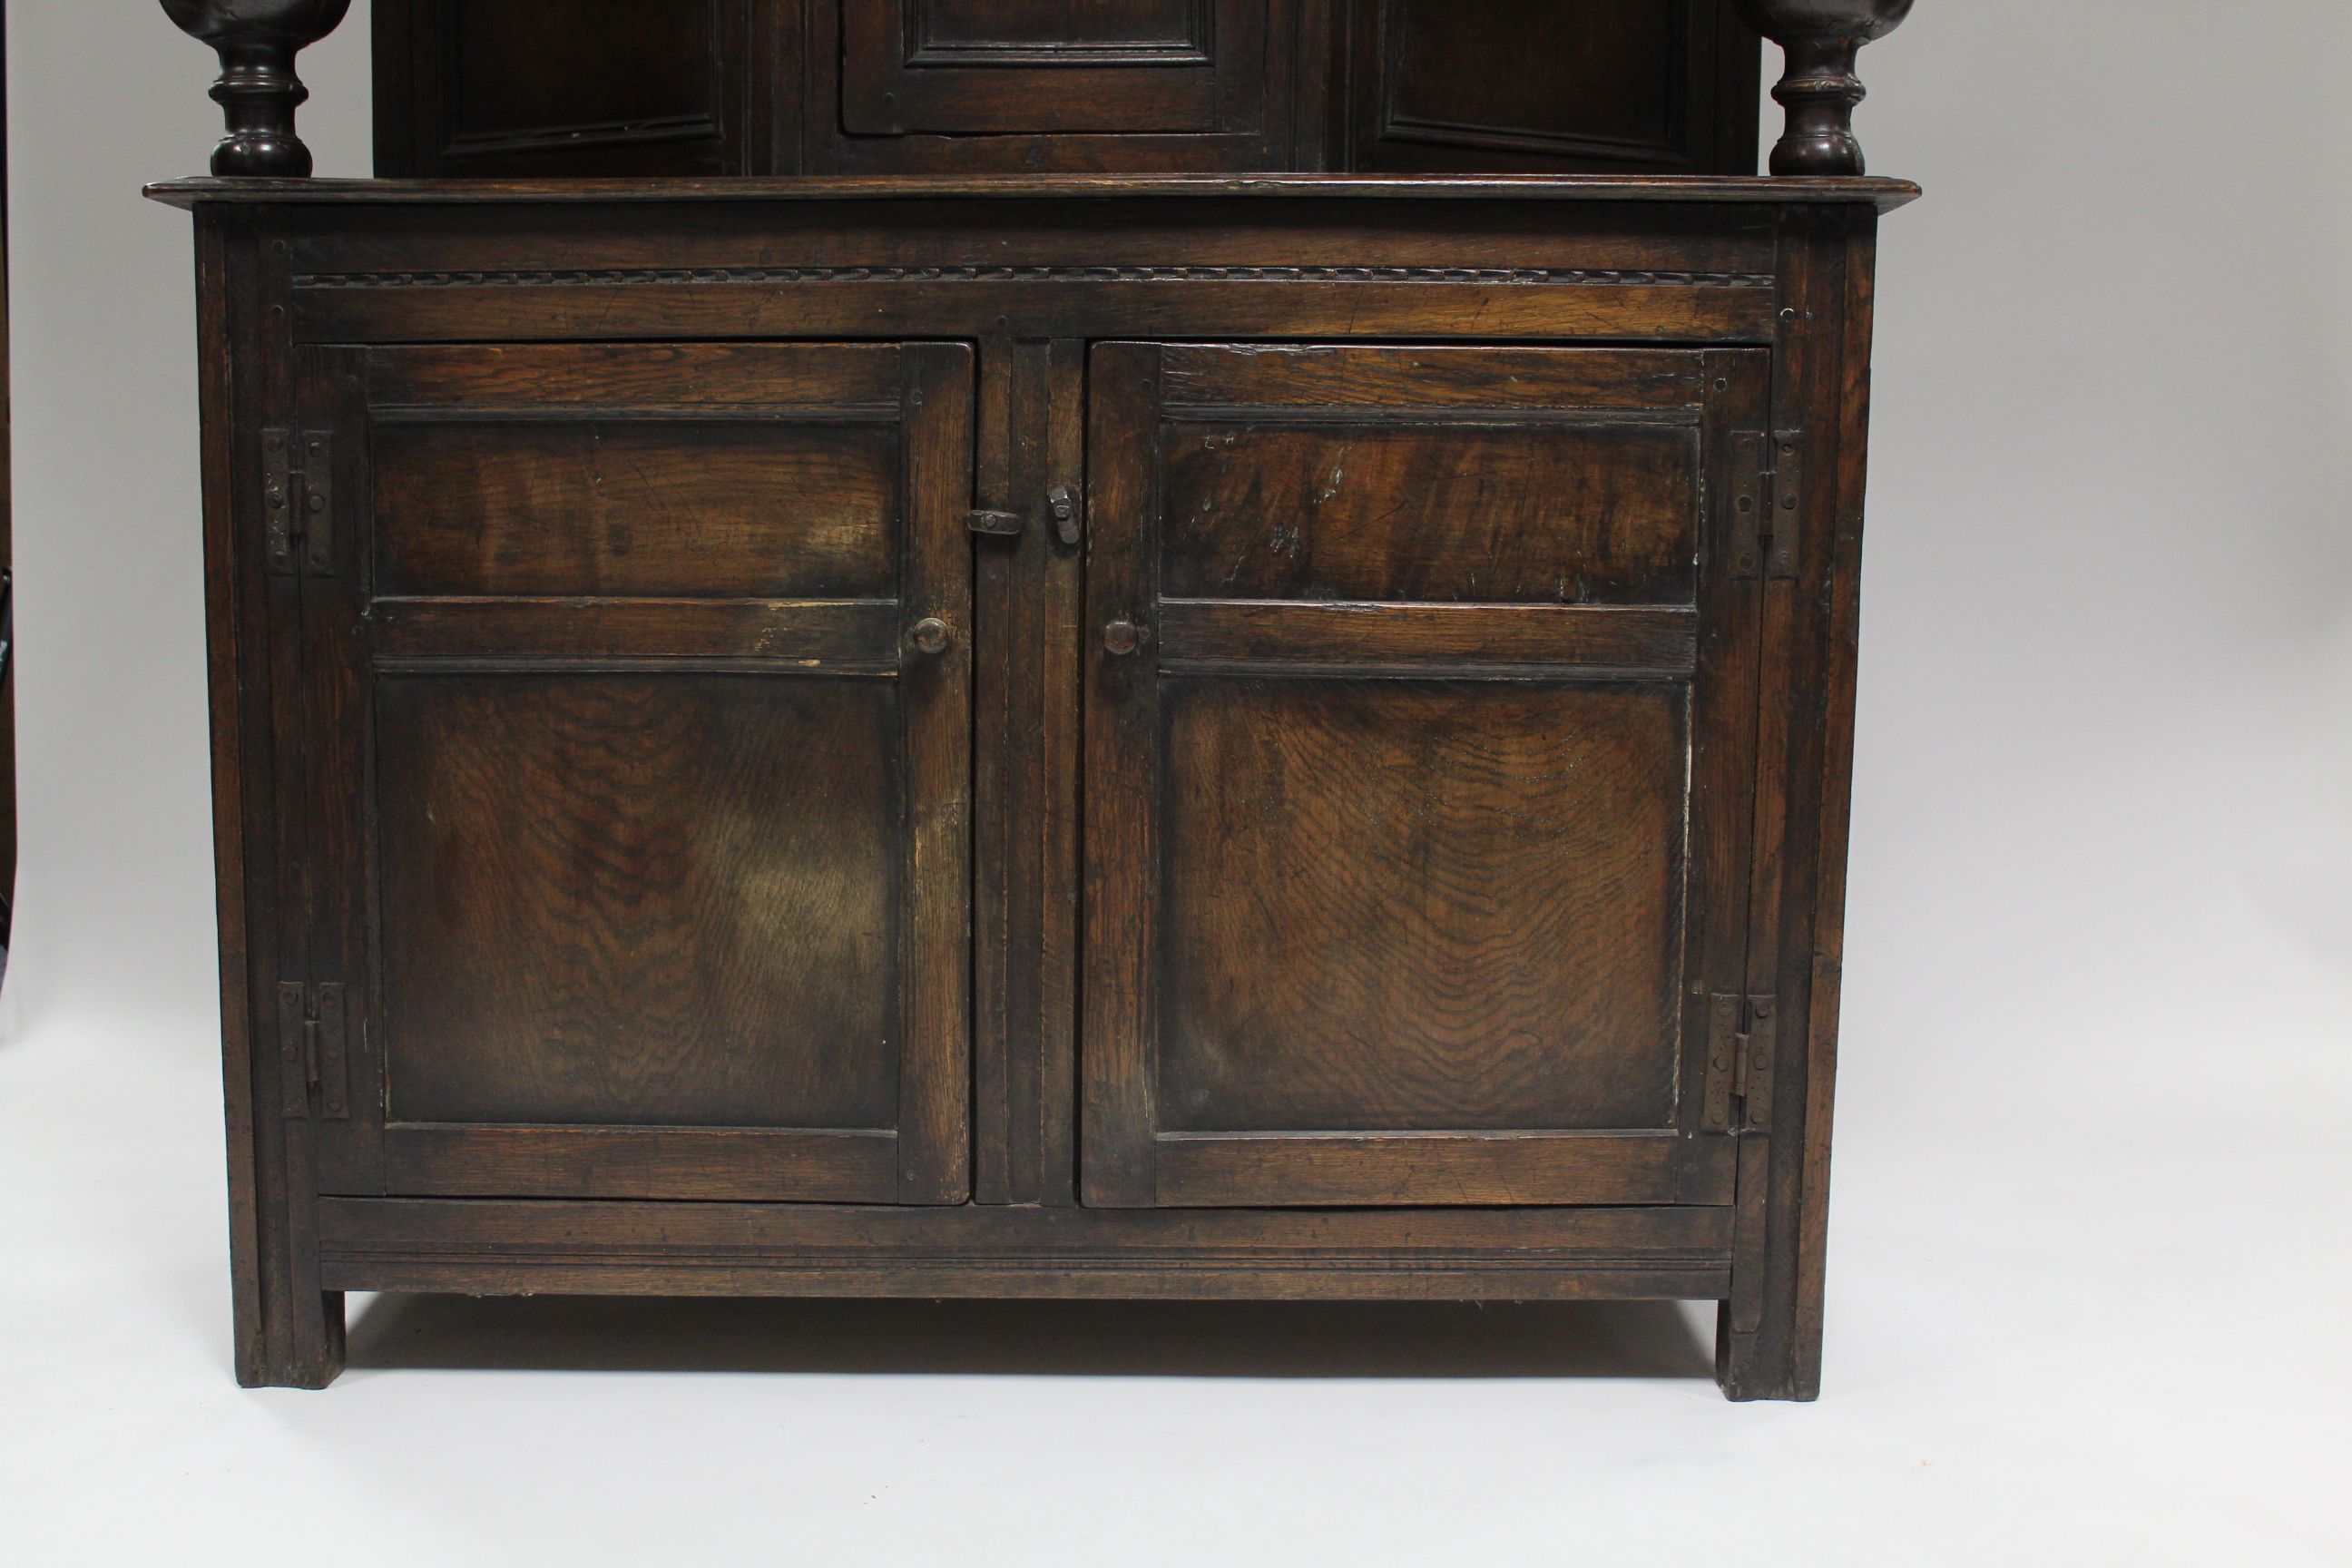 A 17th century-style joined oak court cupboard, the upper part with craved frieze & central panel - Image 4 of 8